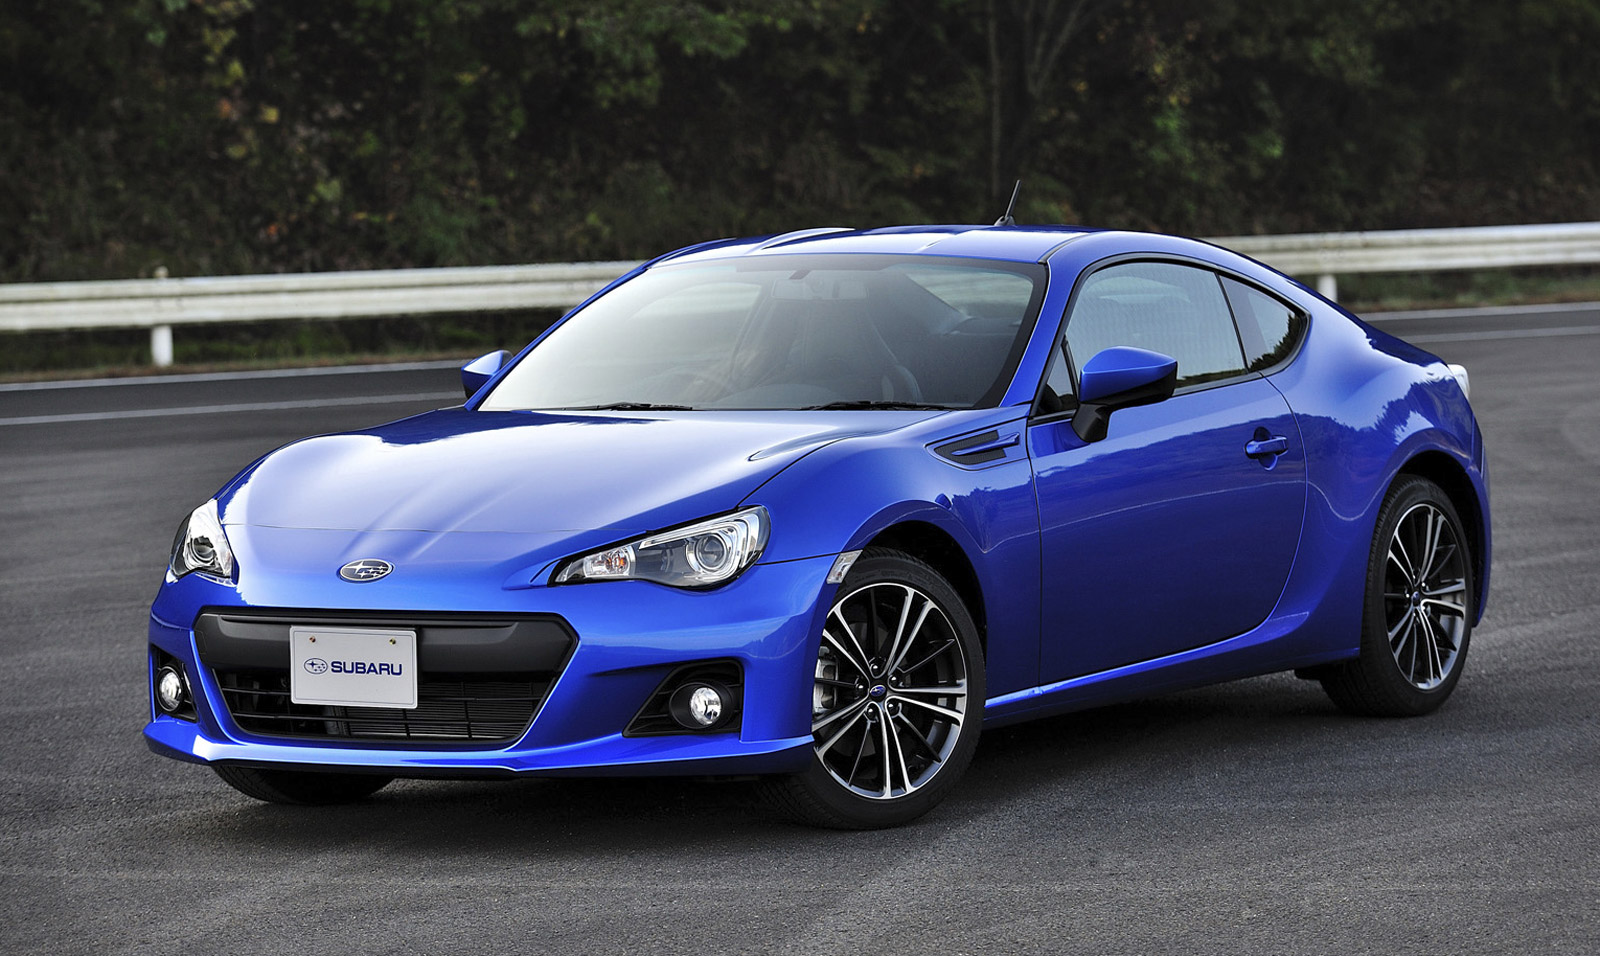 2013 Subaru BRZ To Be Priced About The Same As Scion's FR-S